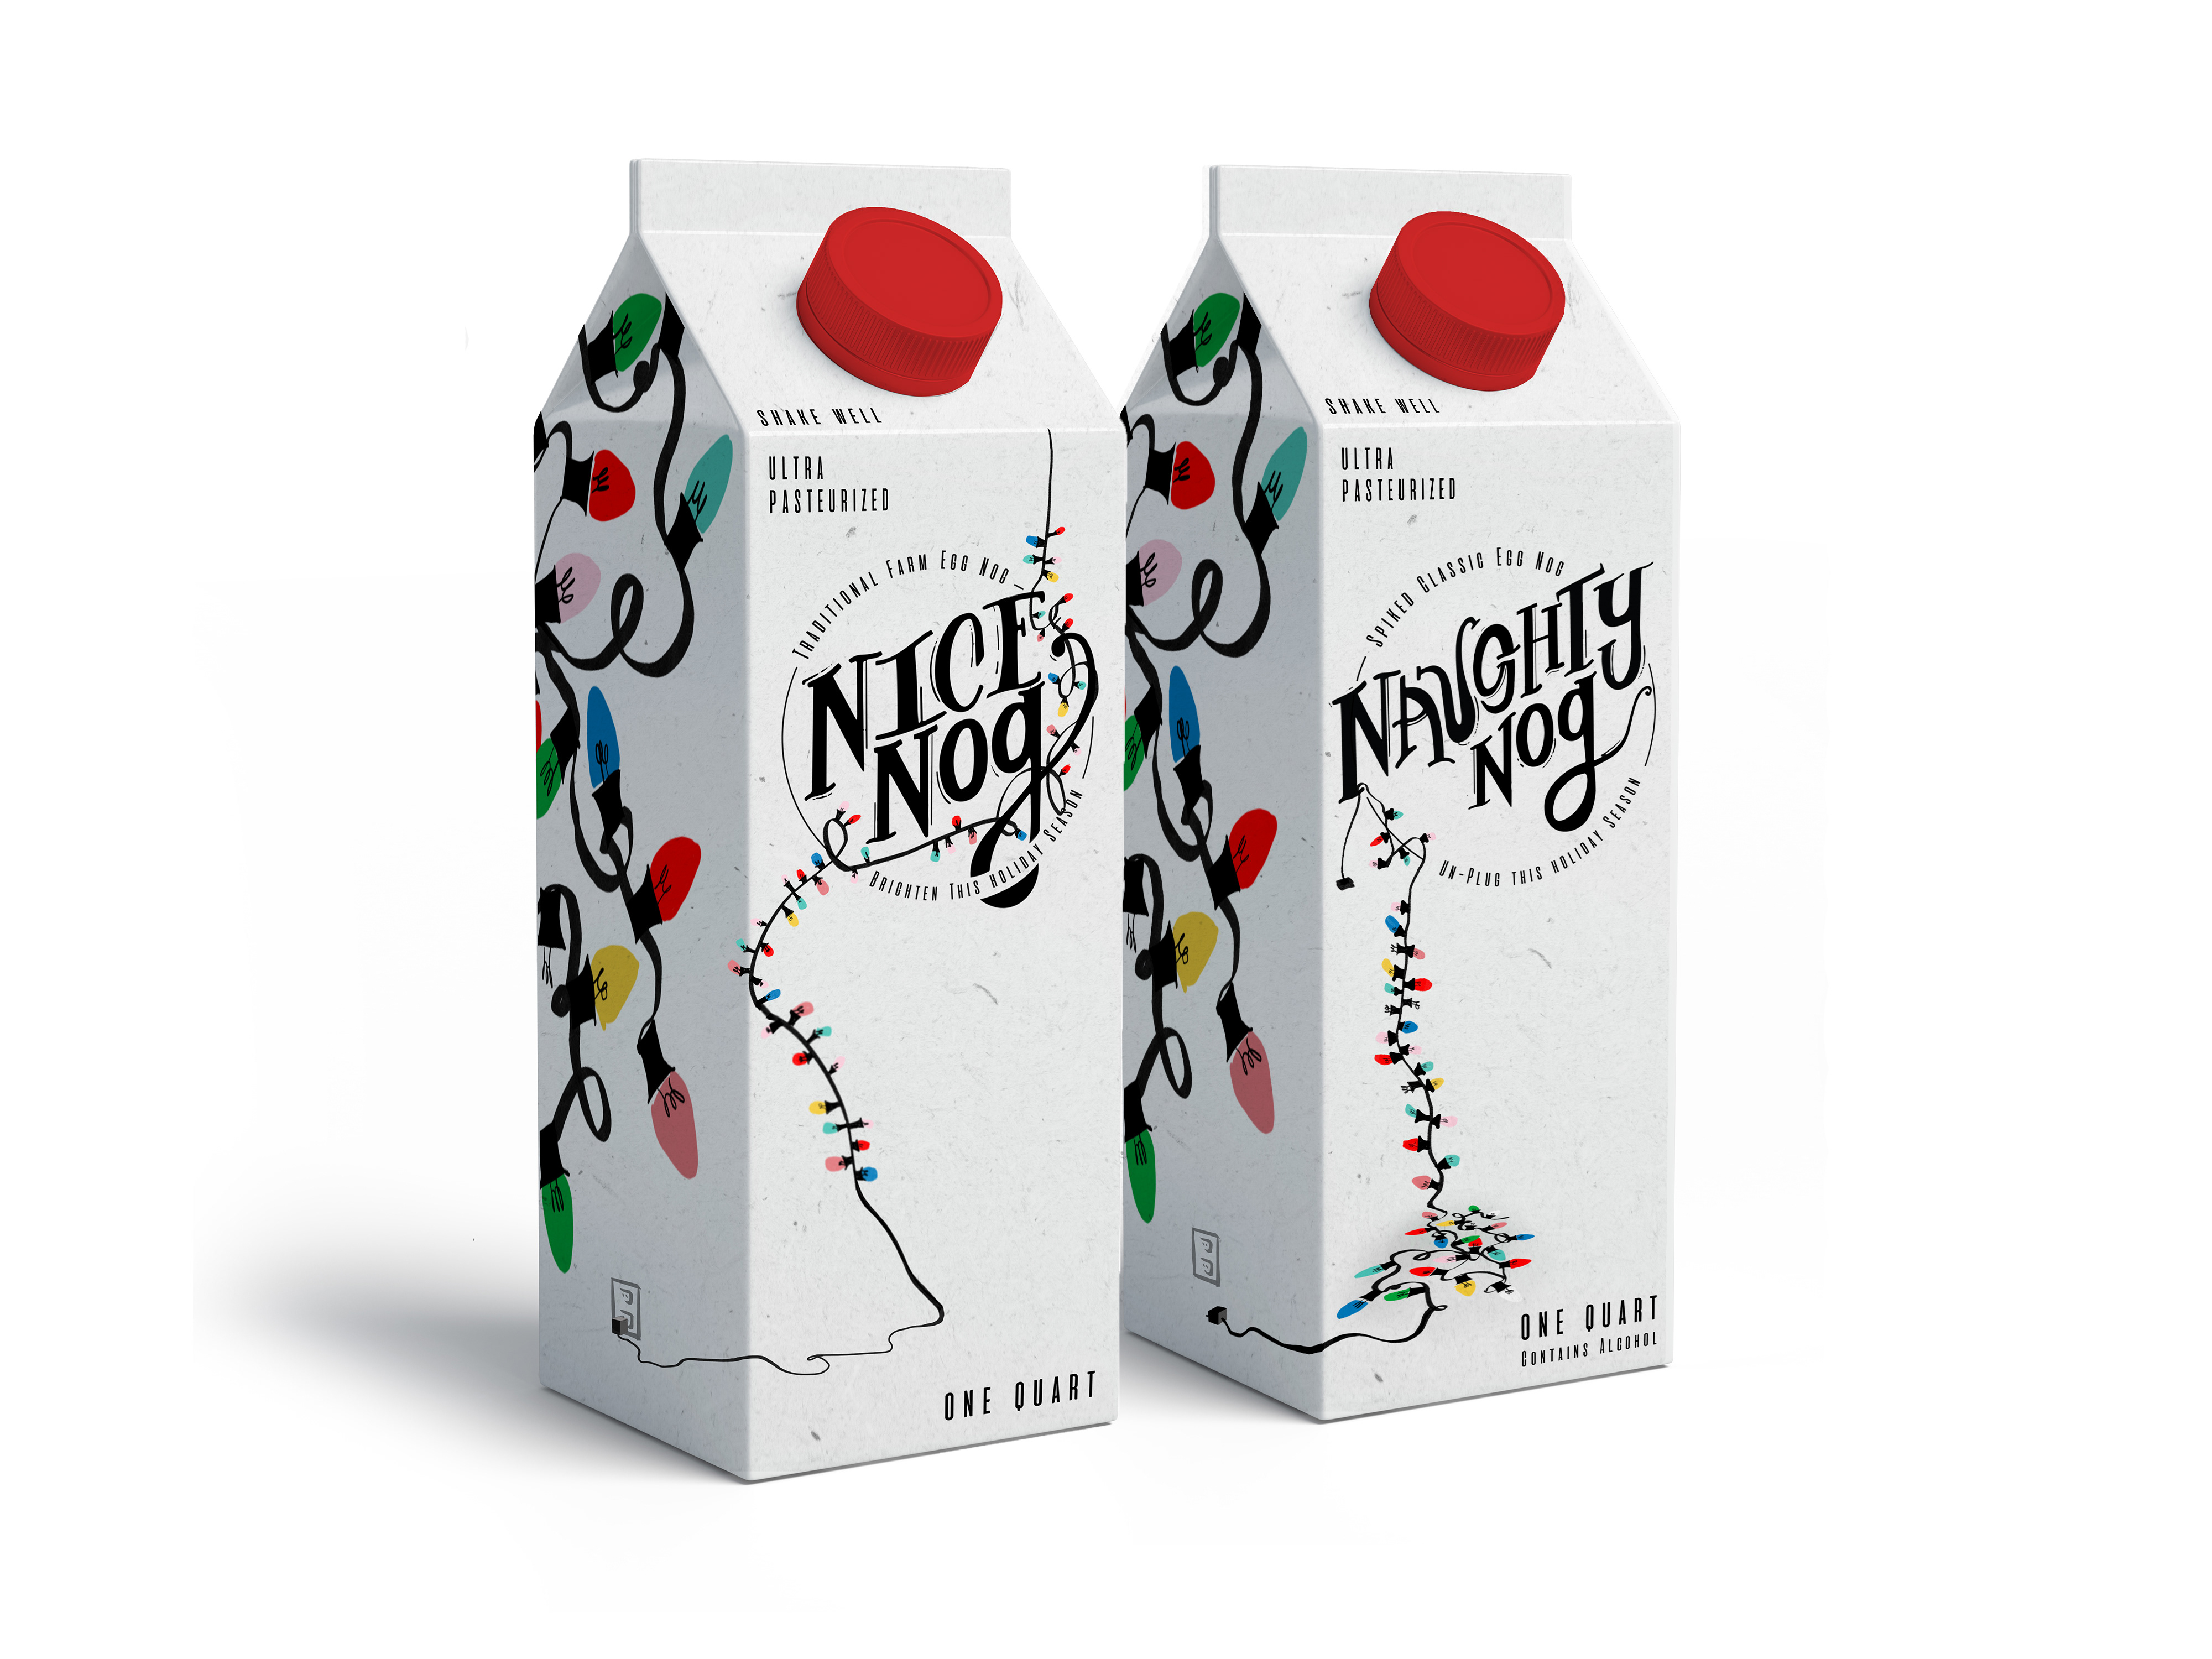 Miscellaneous: Yay! Beautiful examples of American Eggnog packaging